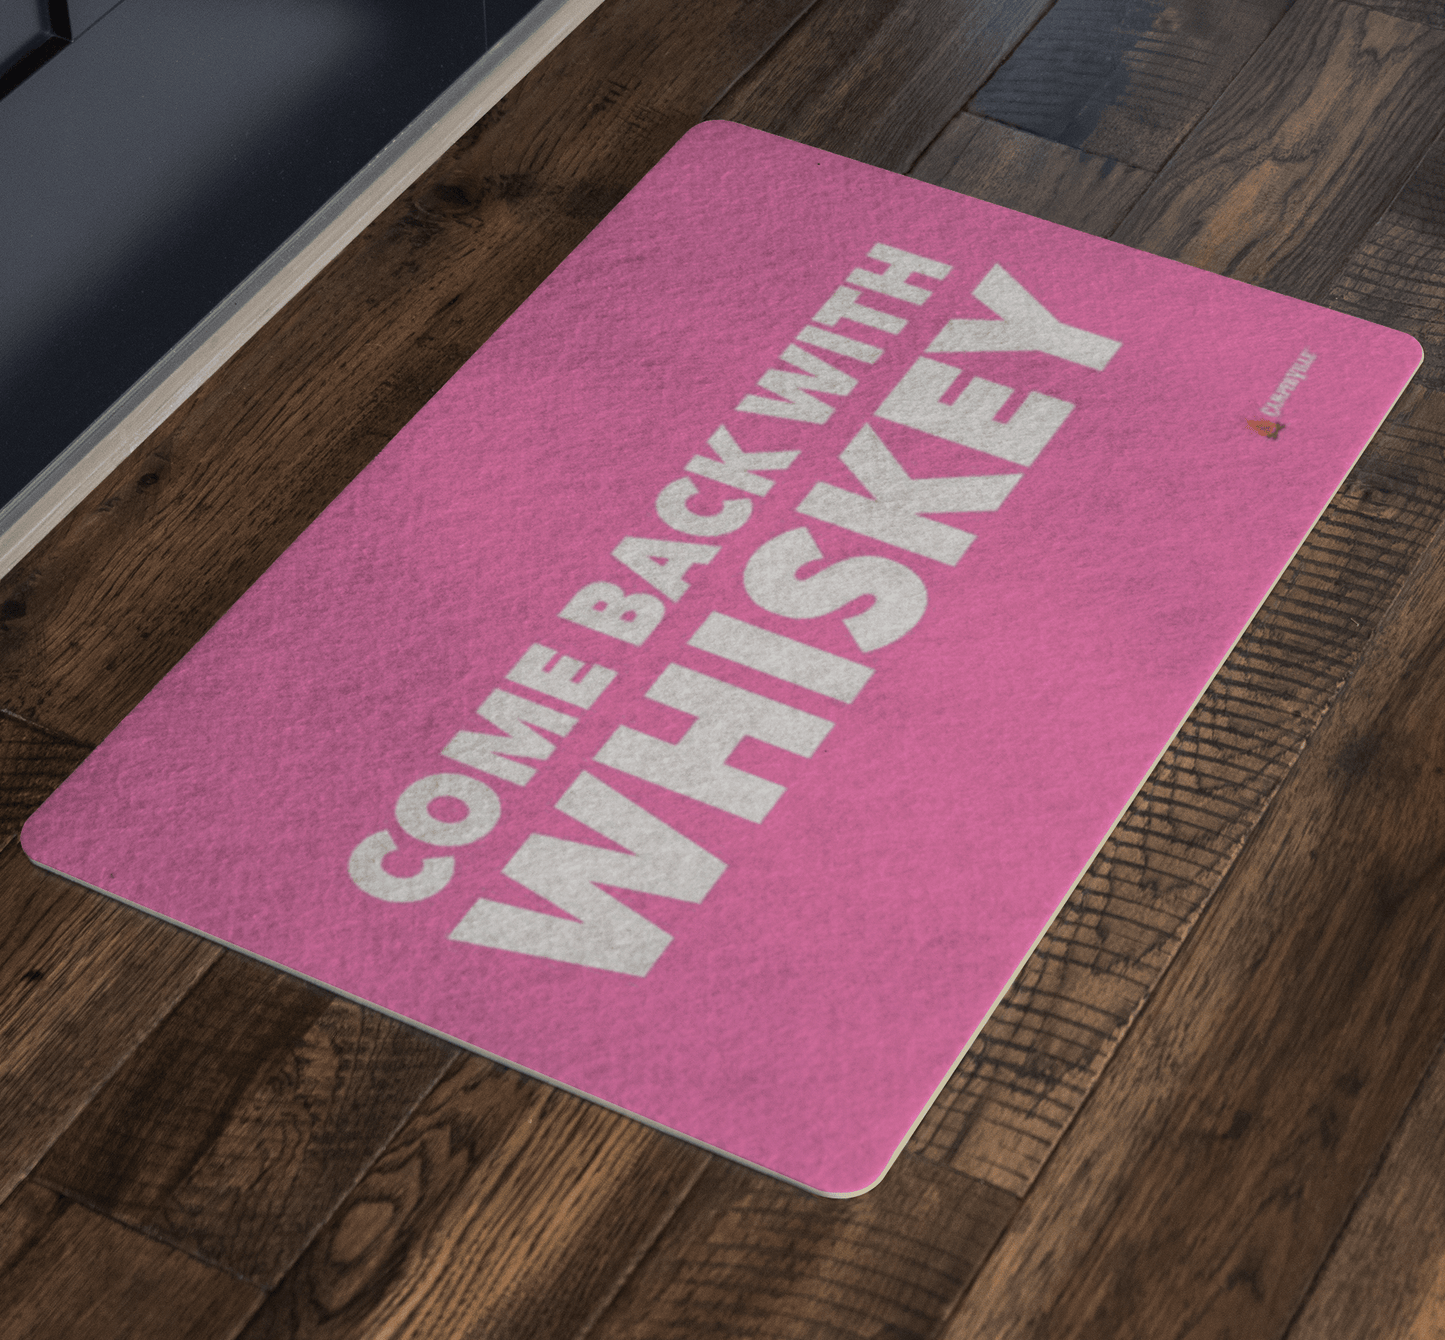 "Come Back With Whiskey" Doormat